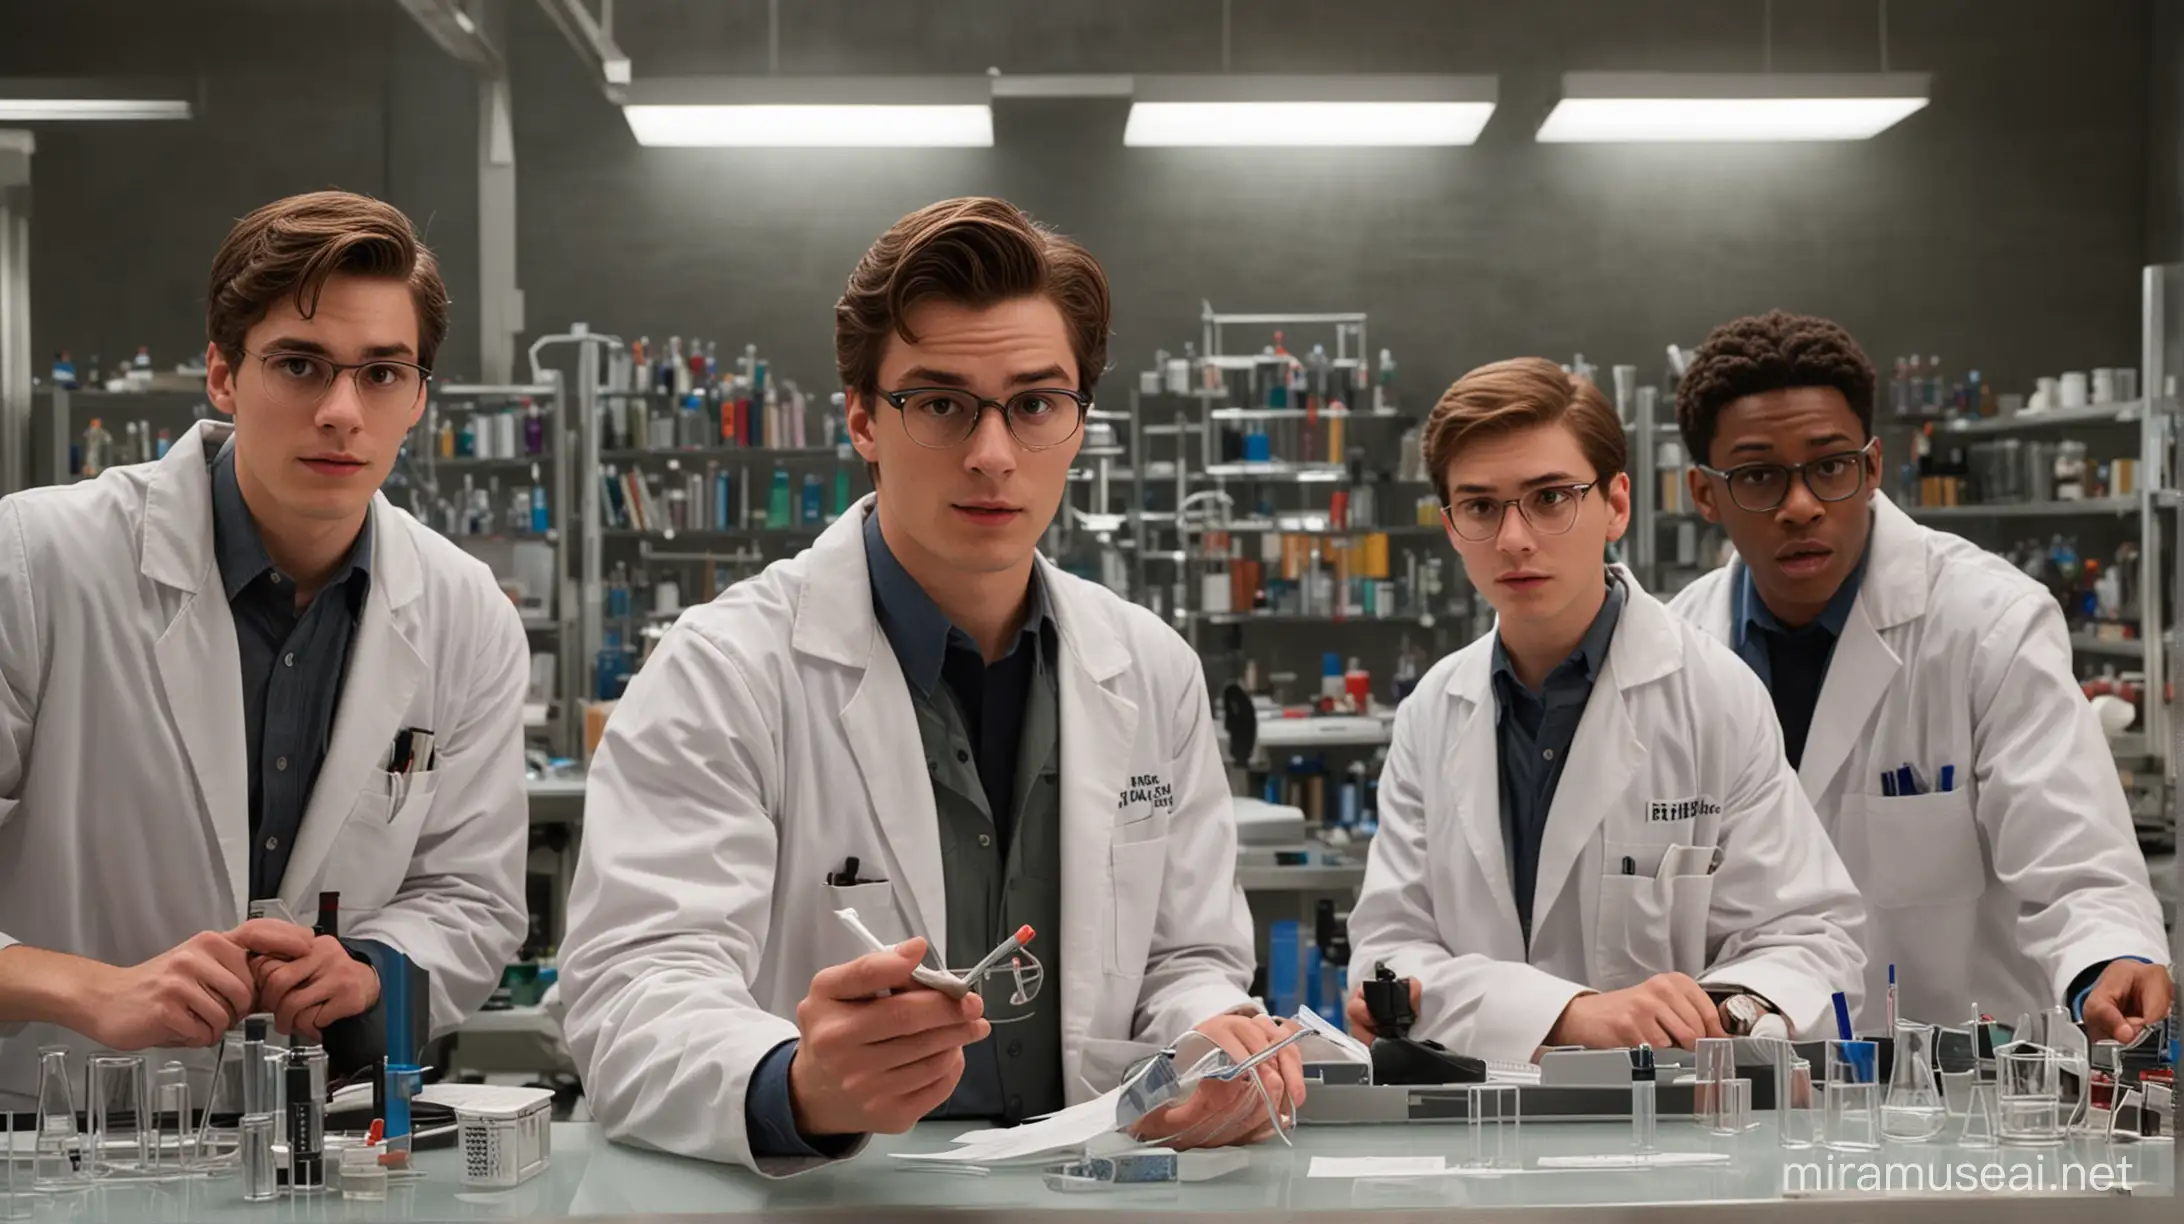 Peter Parker Studying with Friends in Laboratory